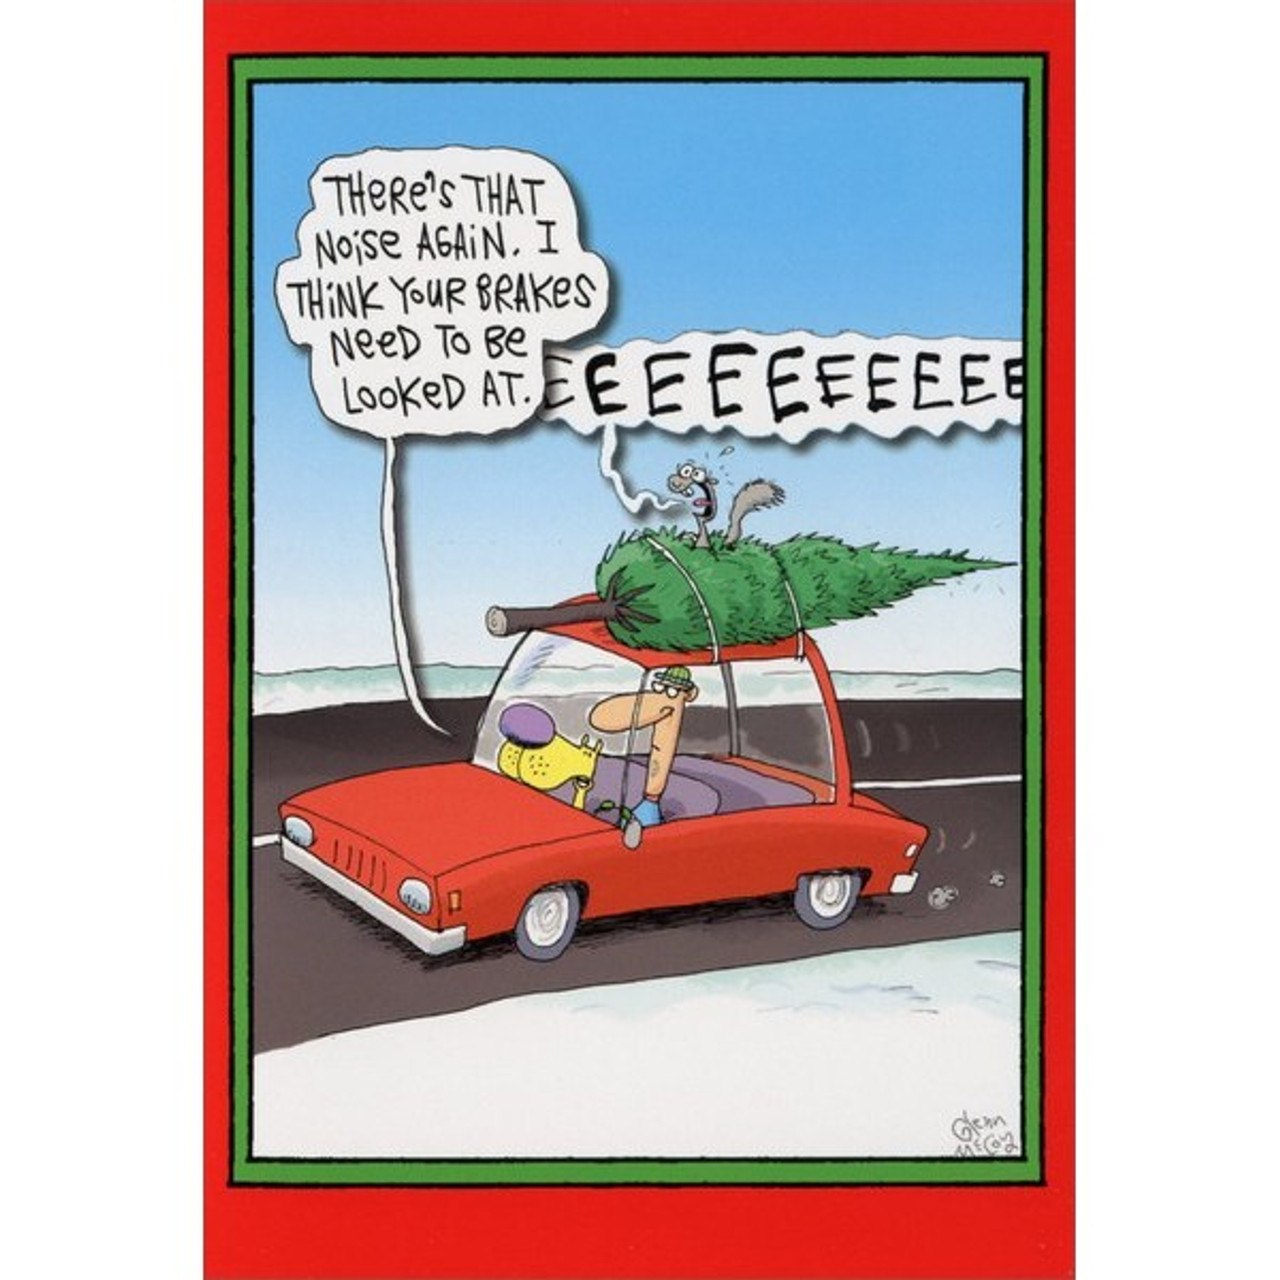 Sunday Funnies - I'm Dreaming of a Nerdy Christmas - WyzGuys